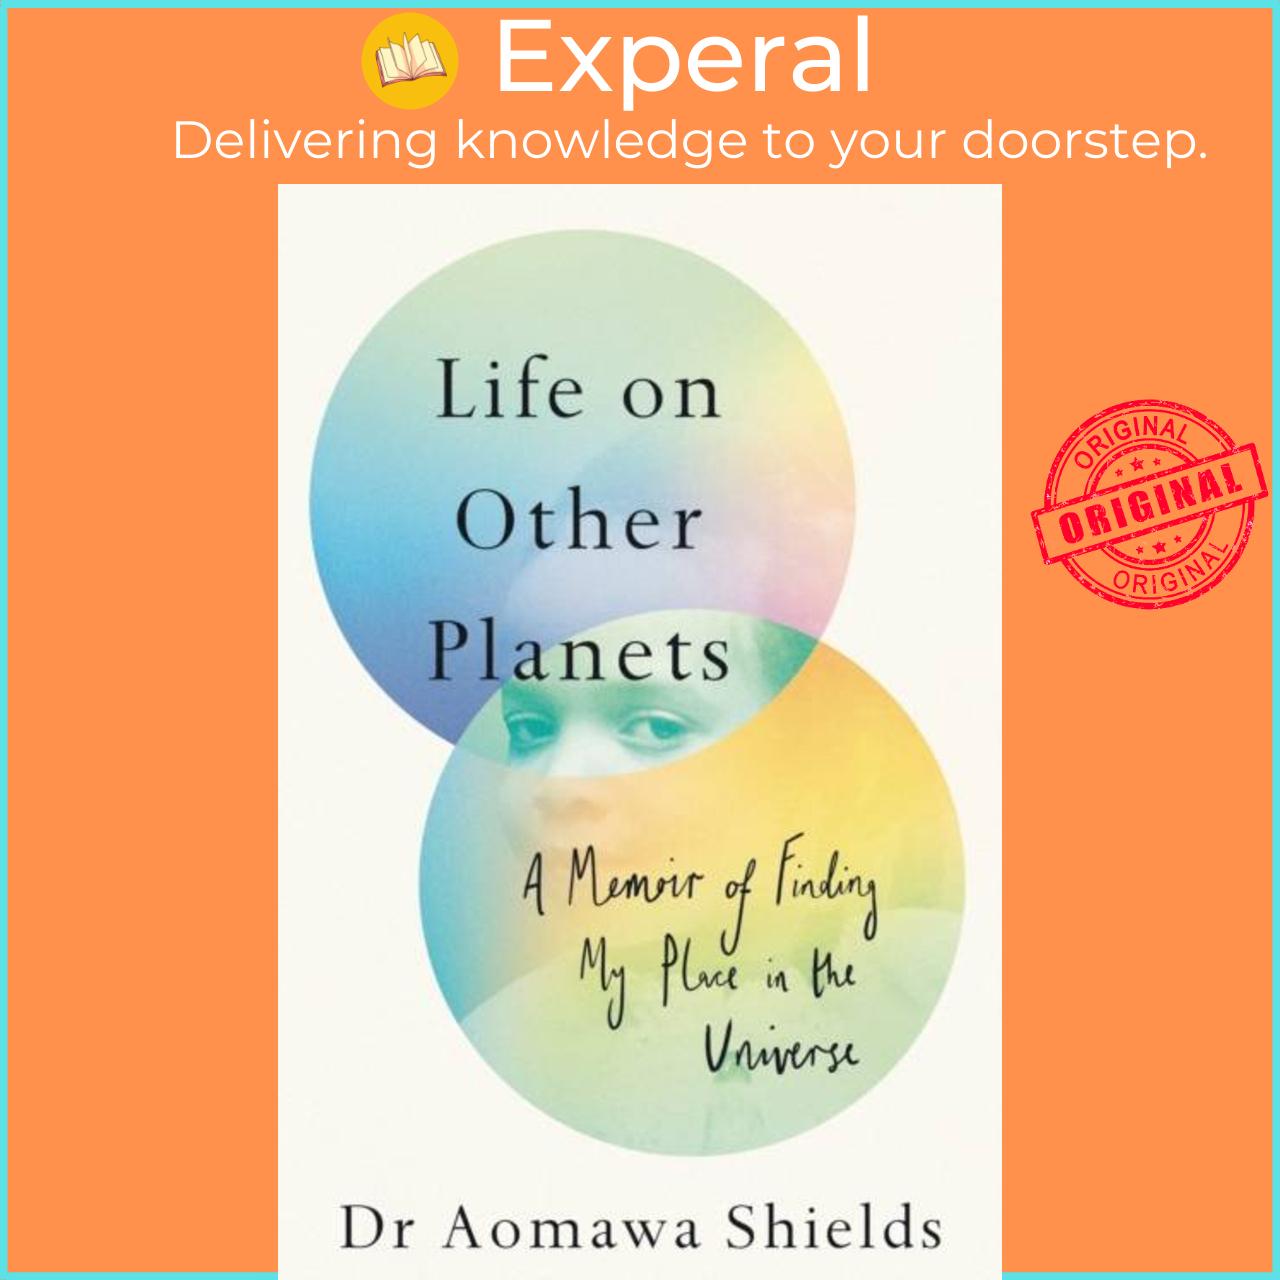 Sách - Life on Other Planets - A Memoir of Finding My Place in the Universe by Aomawa Shields (UK edition, hardcover)